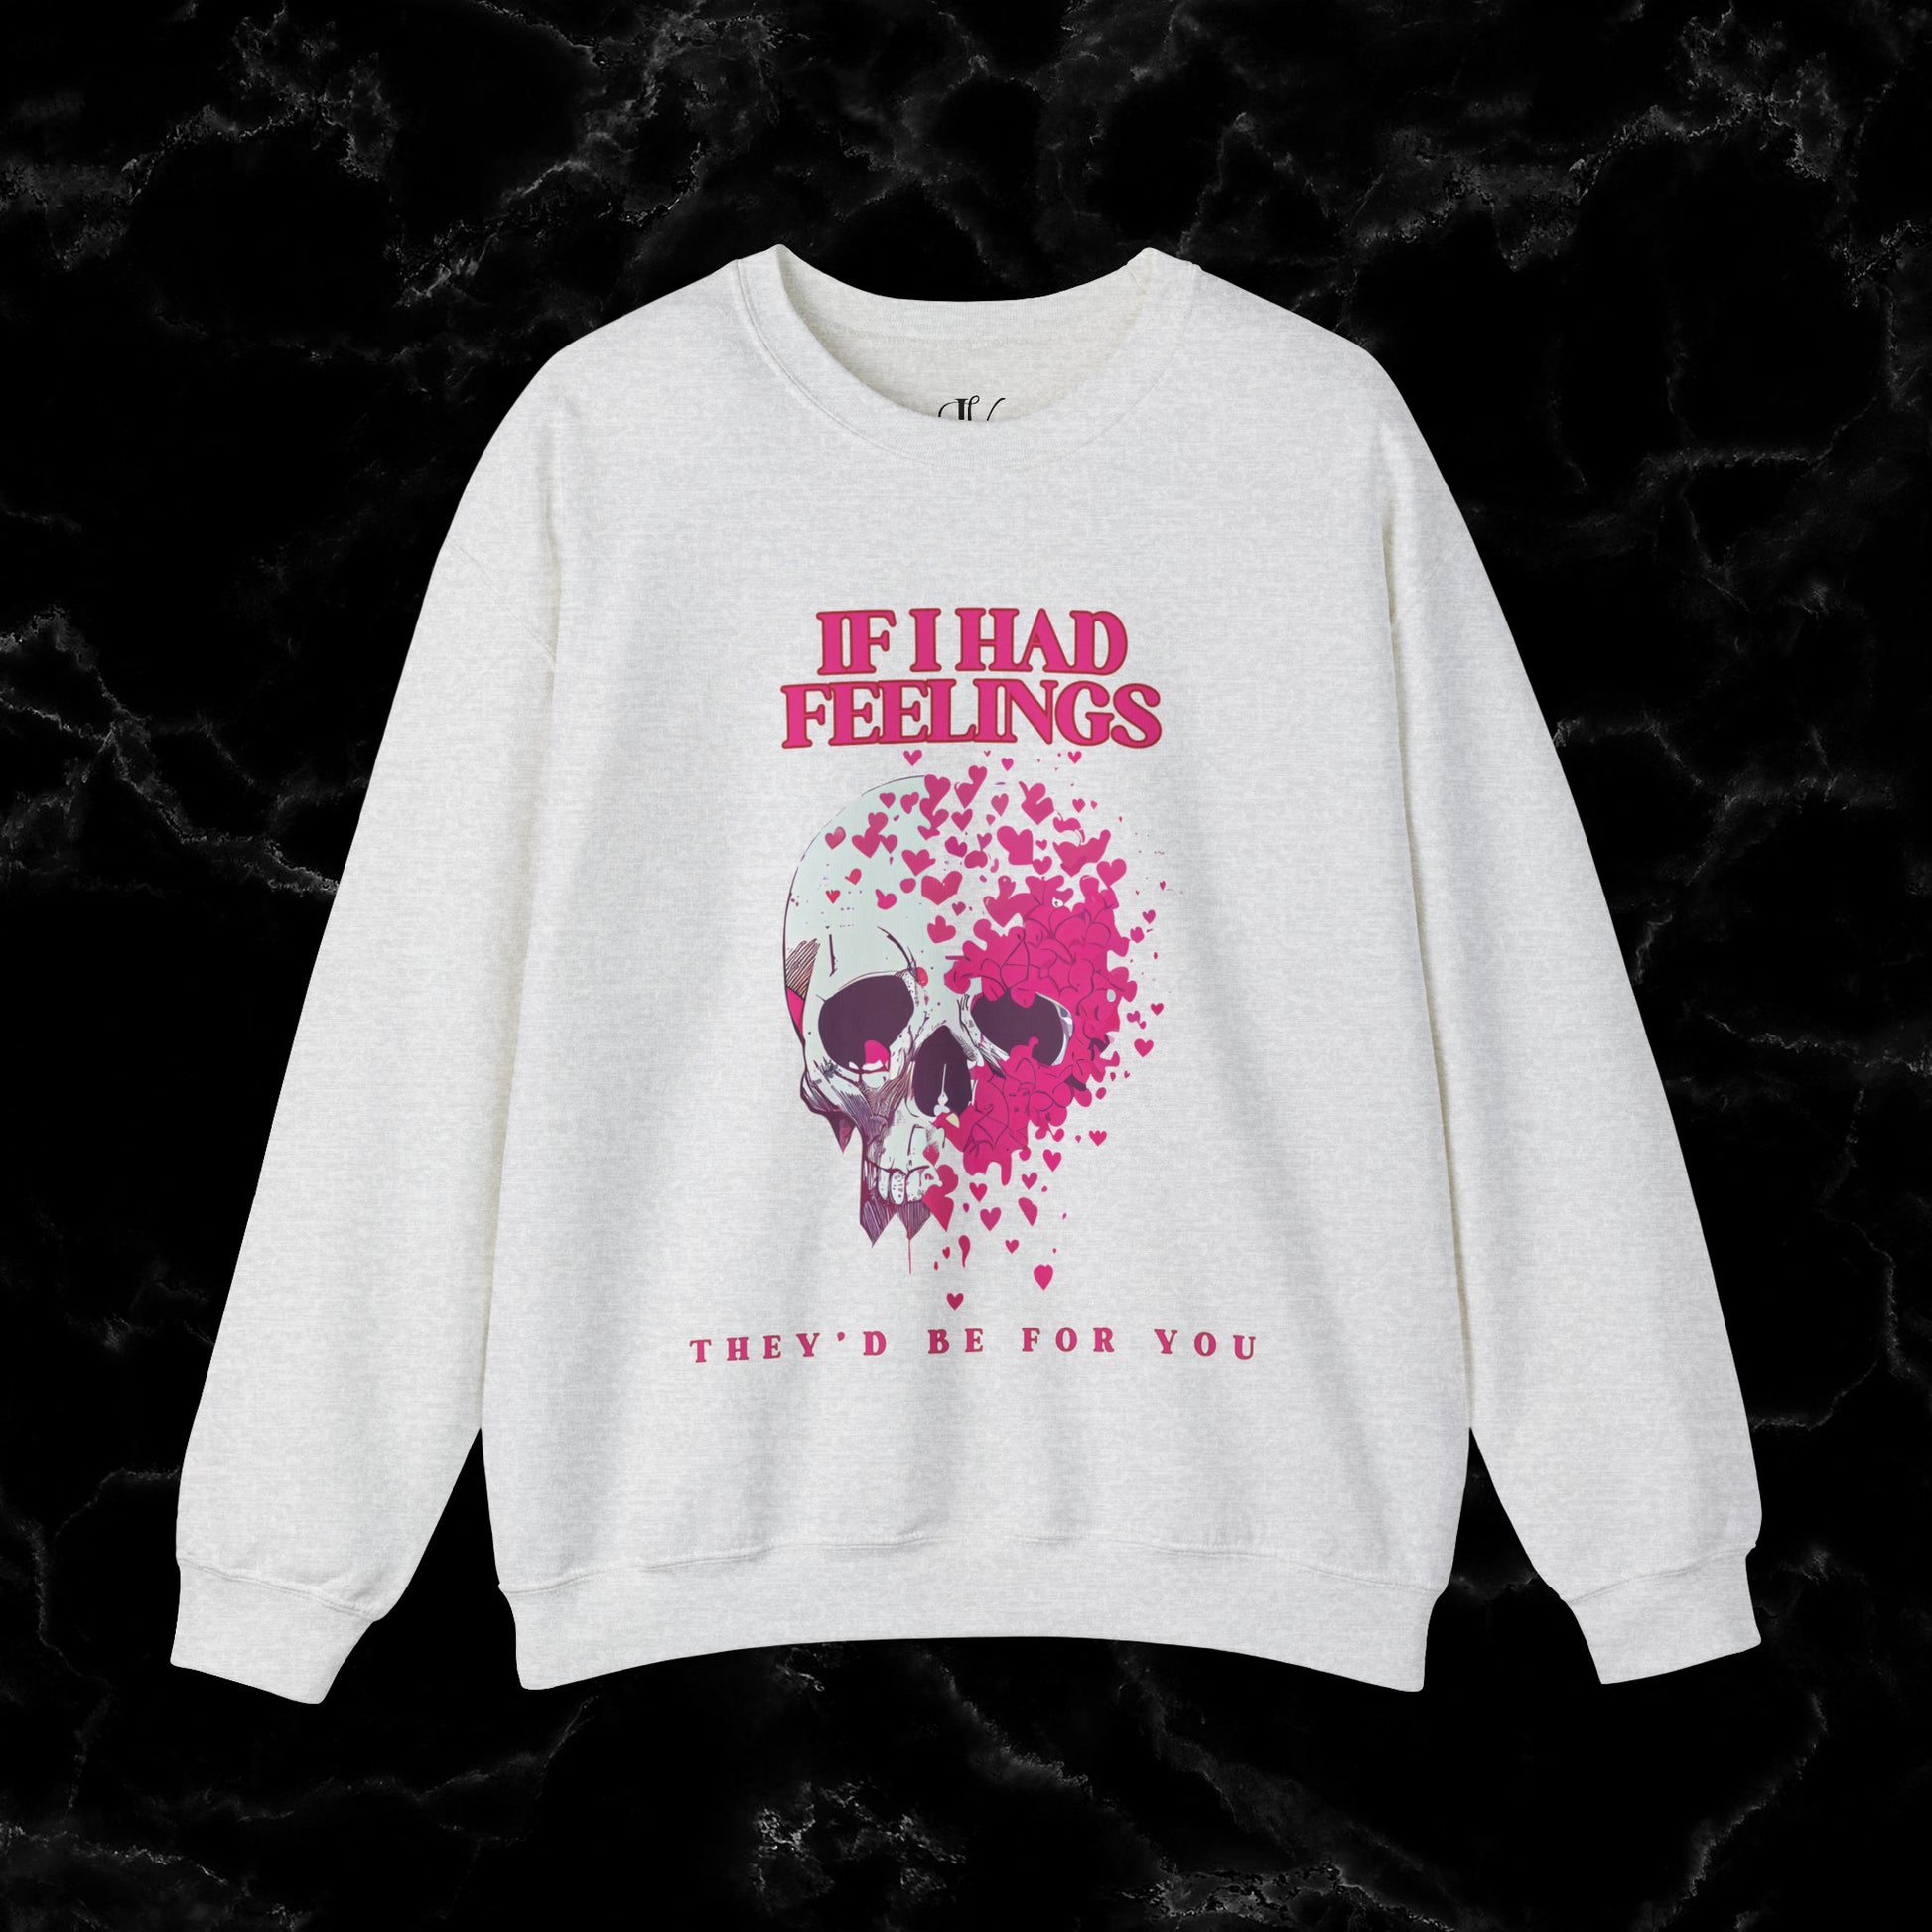 If I Had Feelings, They'd Be For You Sweatshirt - Skeleton Valentines Sweatshirt - Funny Valentines Sweater - Women's Valentines - Valentines Gift Sweatshirt S Ash 